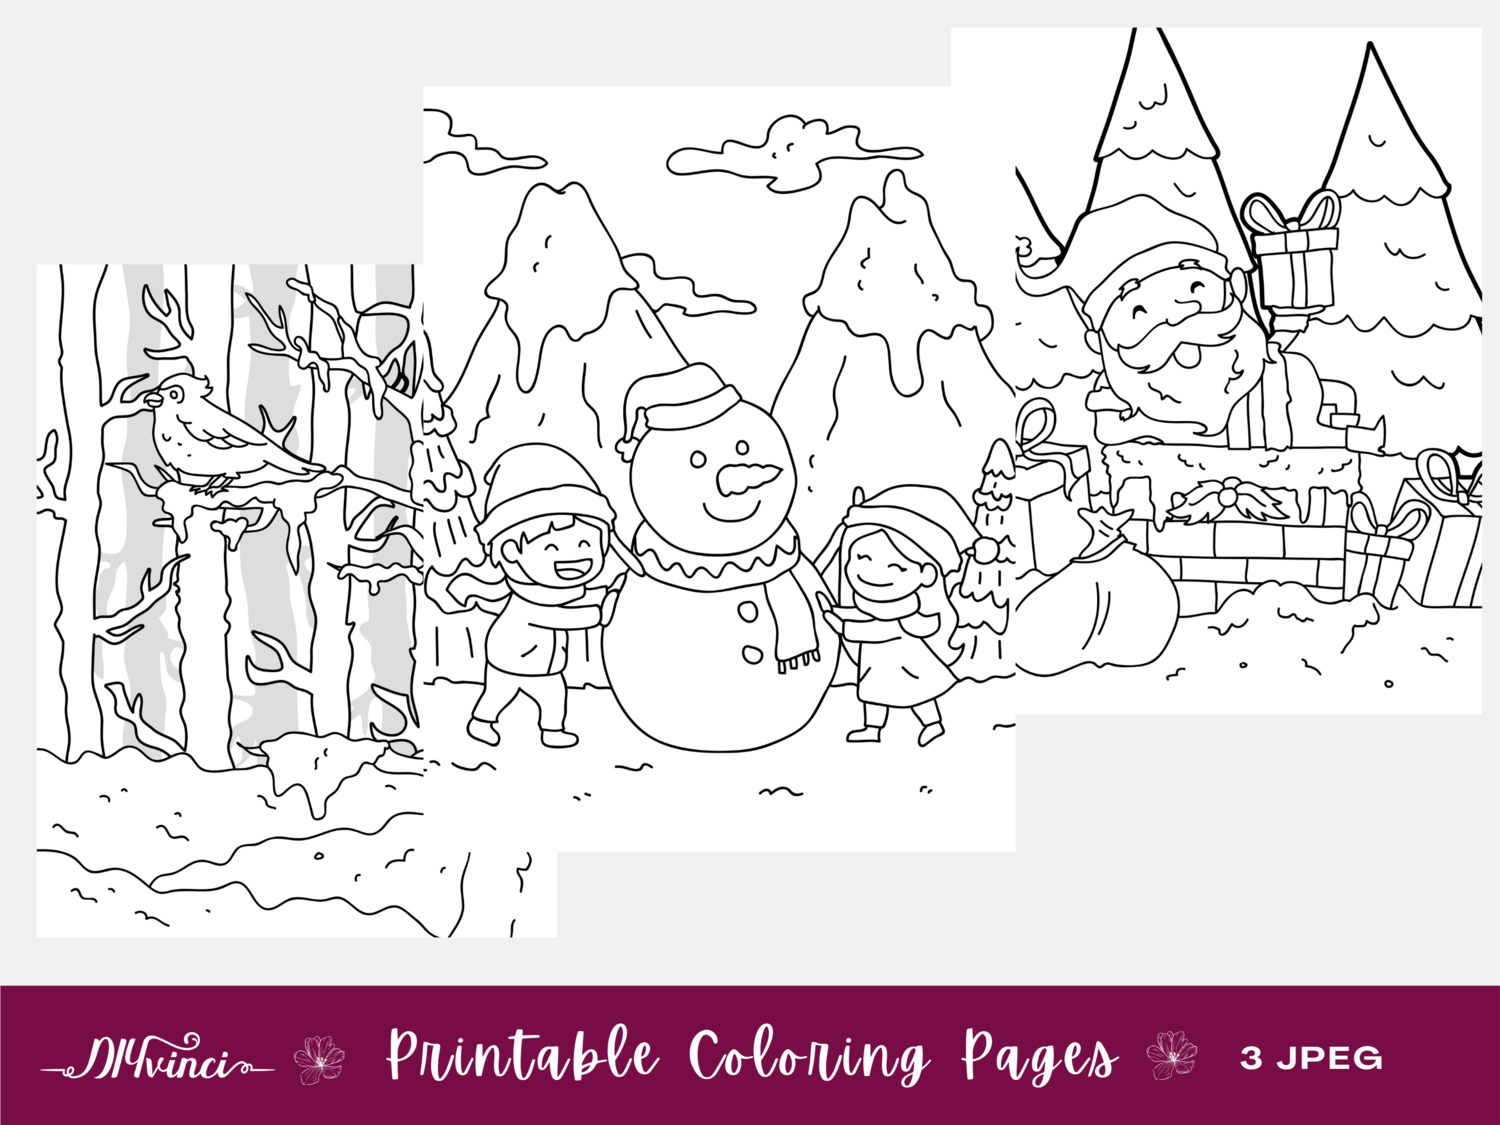 Three Printable Christmas Coloring Pages   JPEG   Personal & Commercial Use